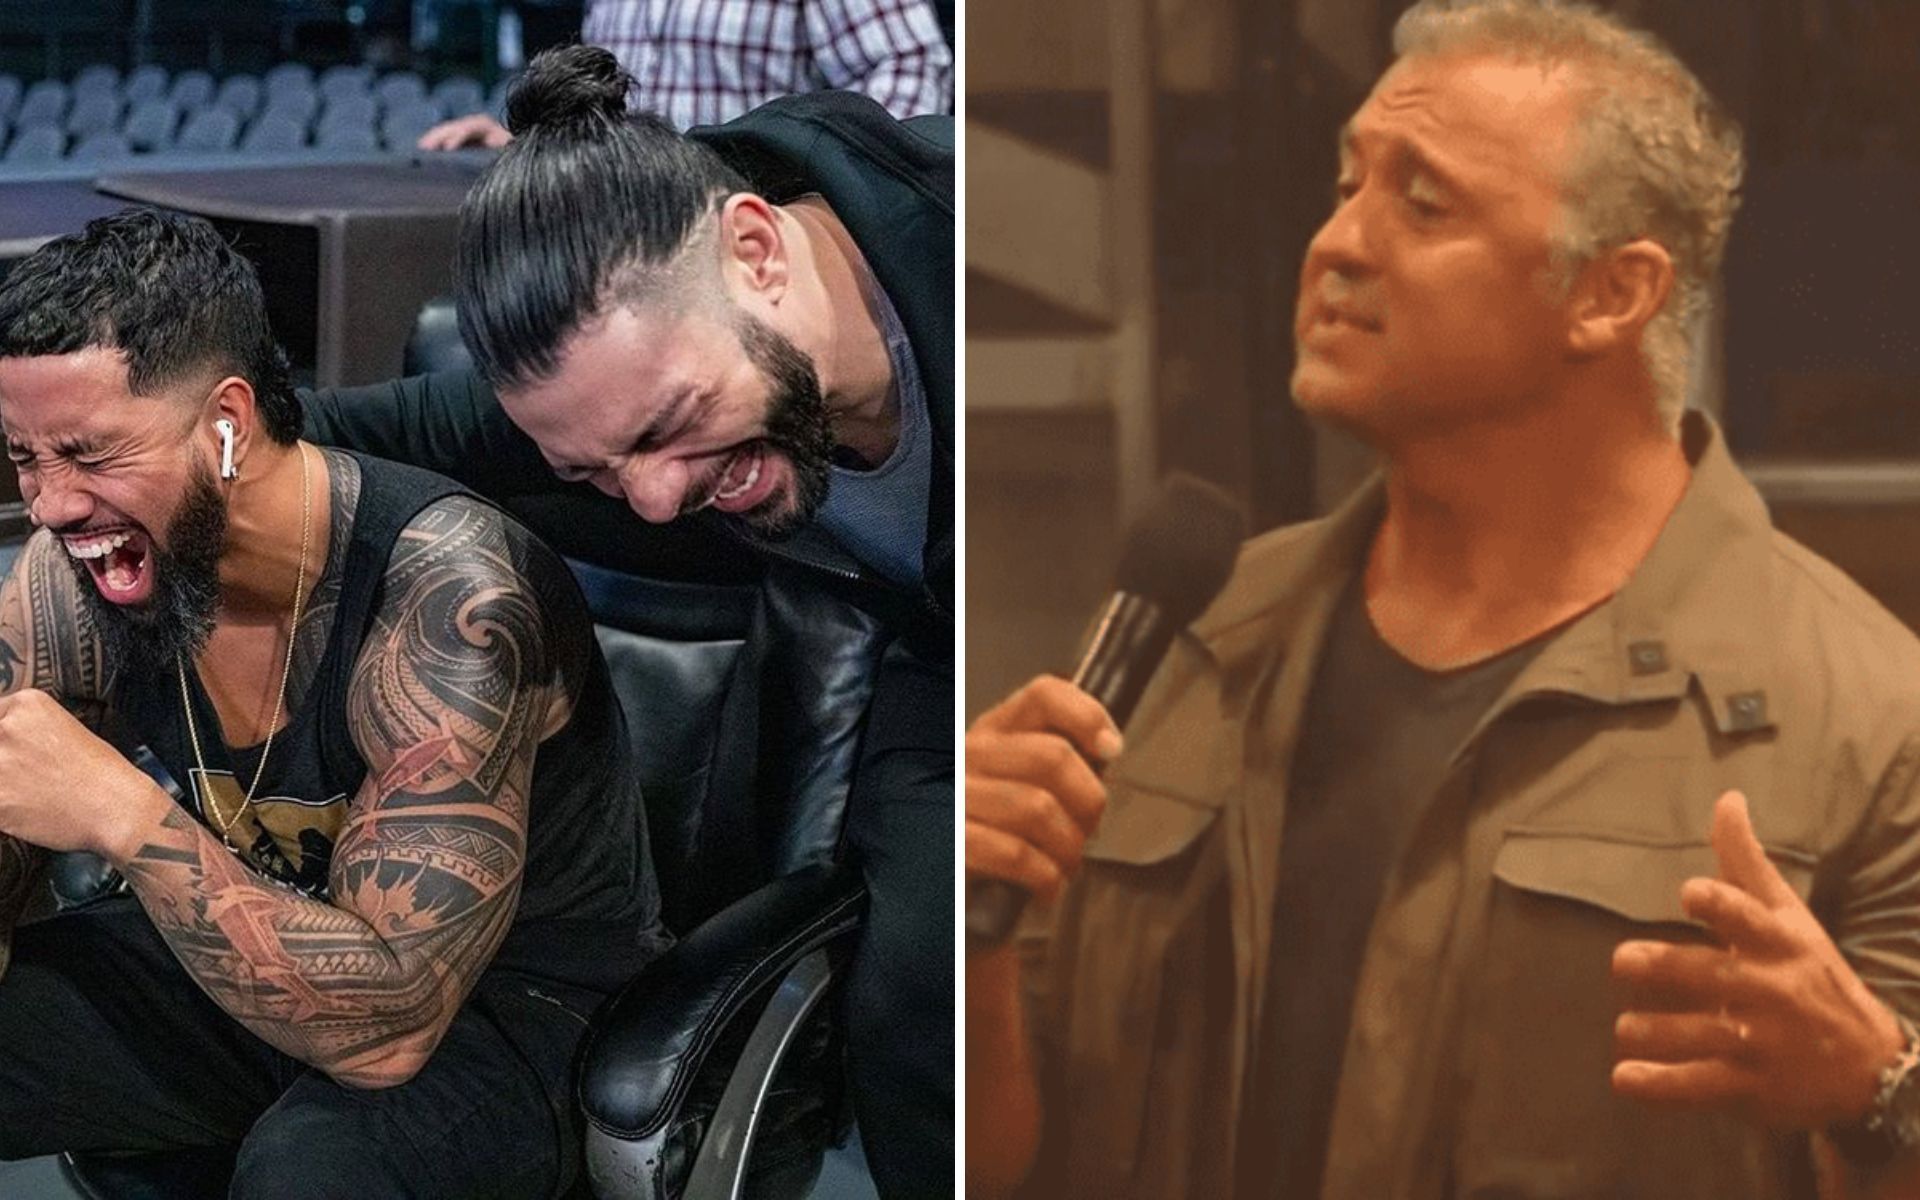 Roman Reigns and Jey Uso having a laugh; The Prodigal Son on RAW Underground